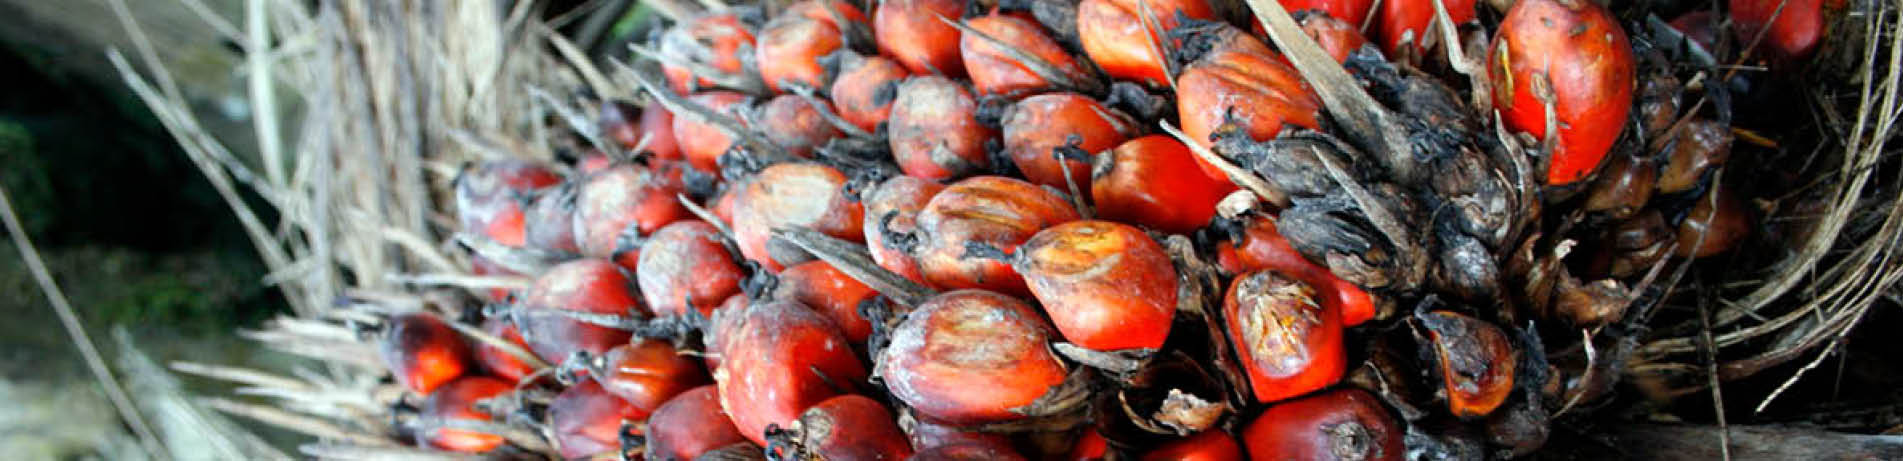 Palm oil fruits